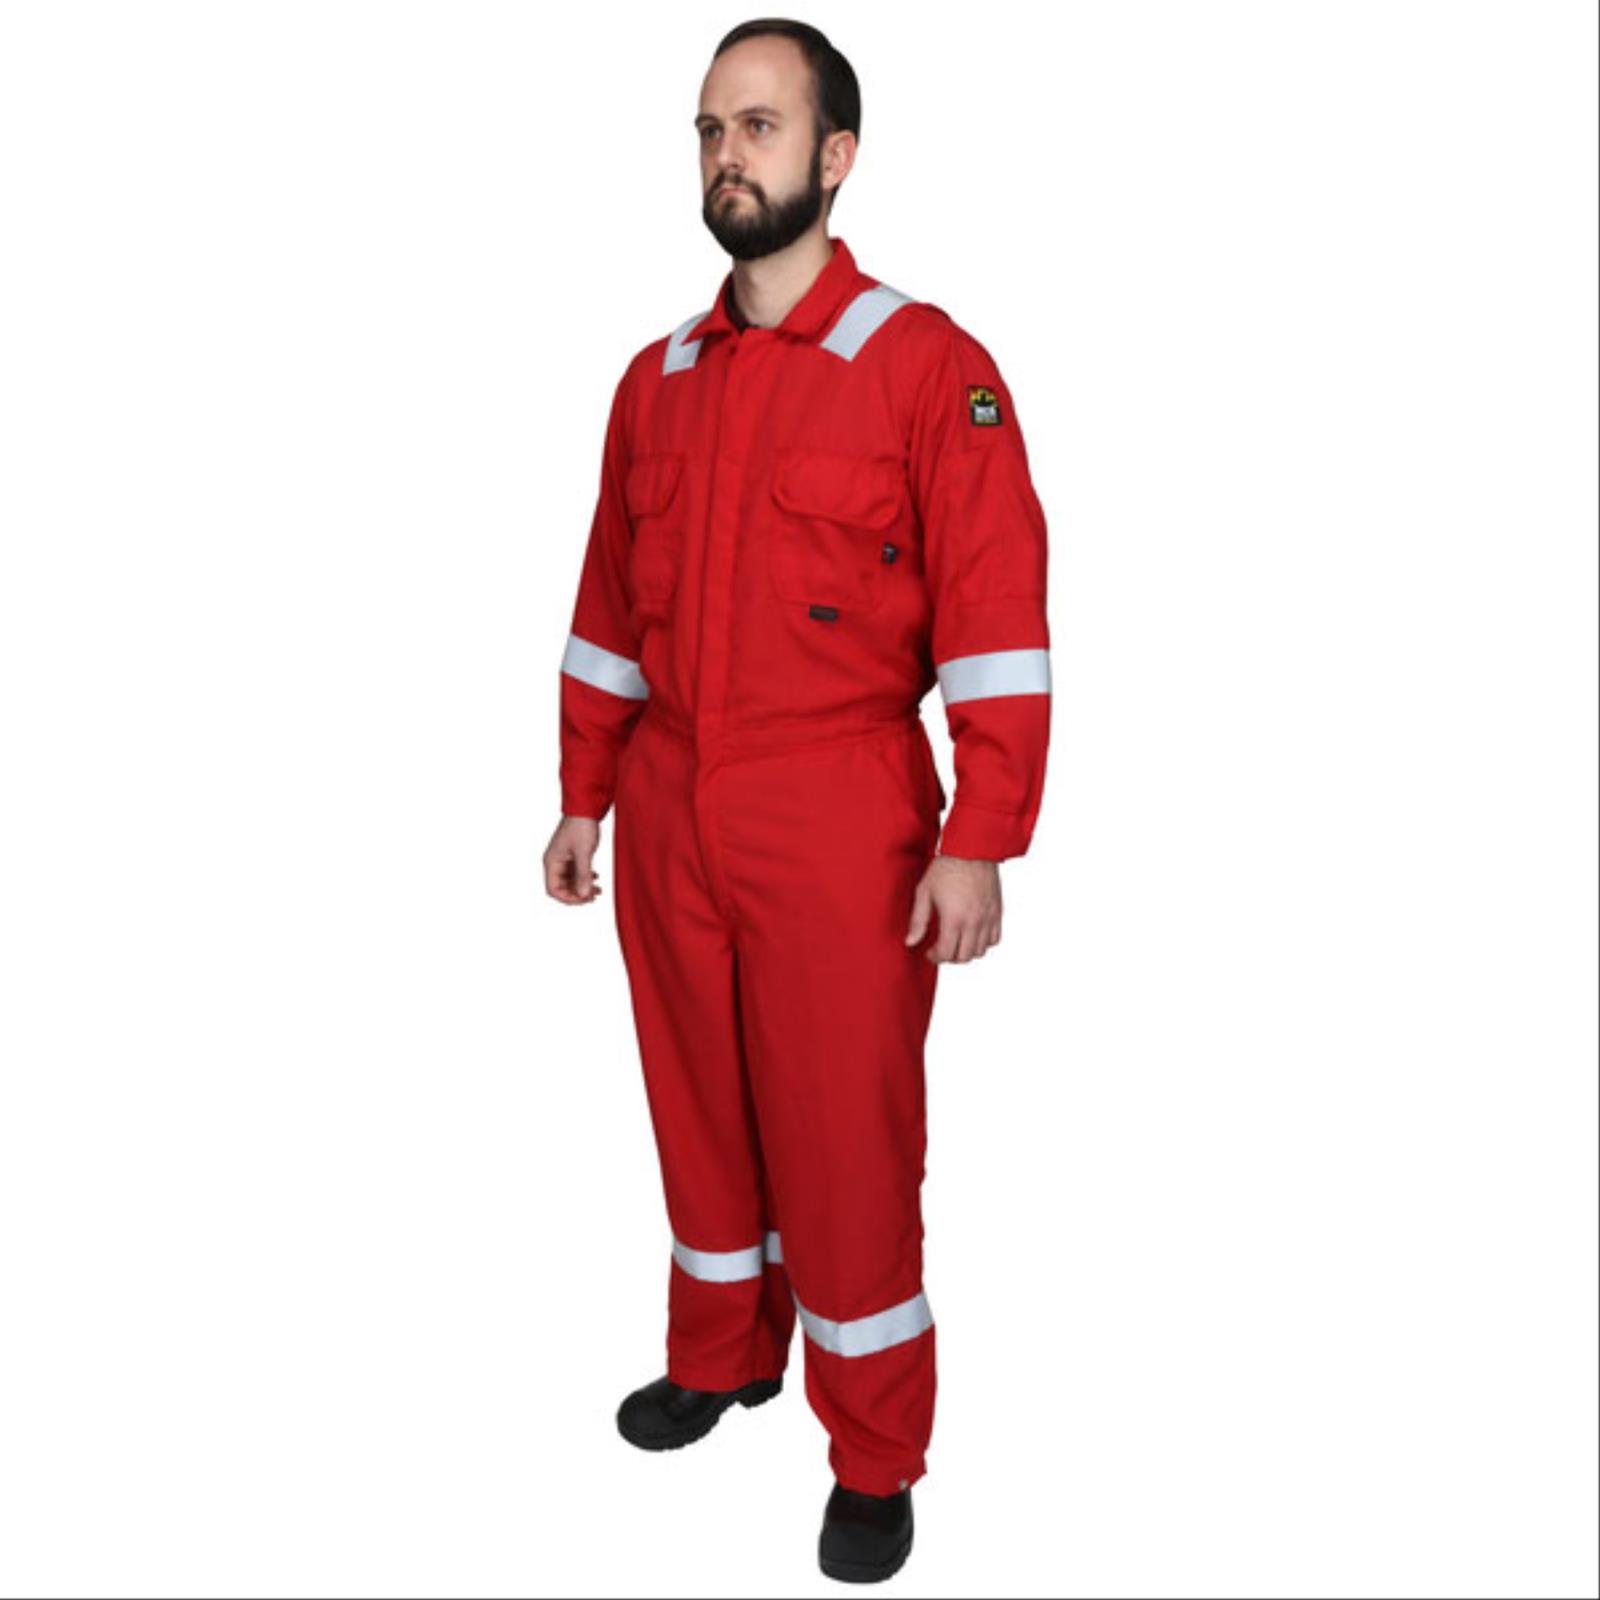 FR Deluxe Coverall, Nomex®, Red with Silver Reflective Stripes